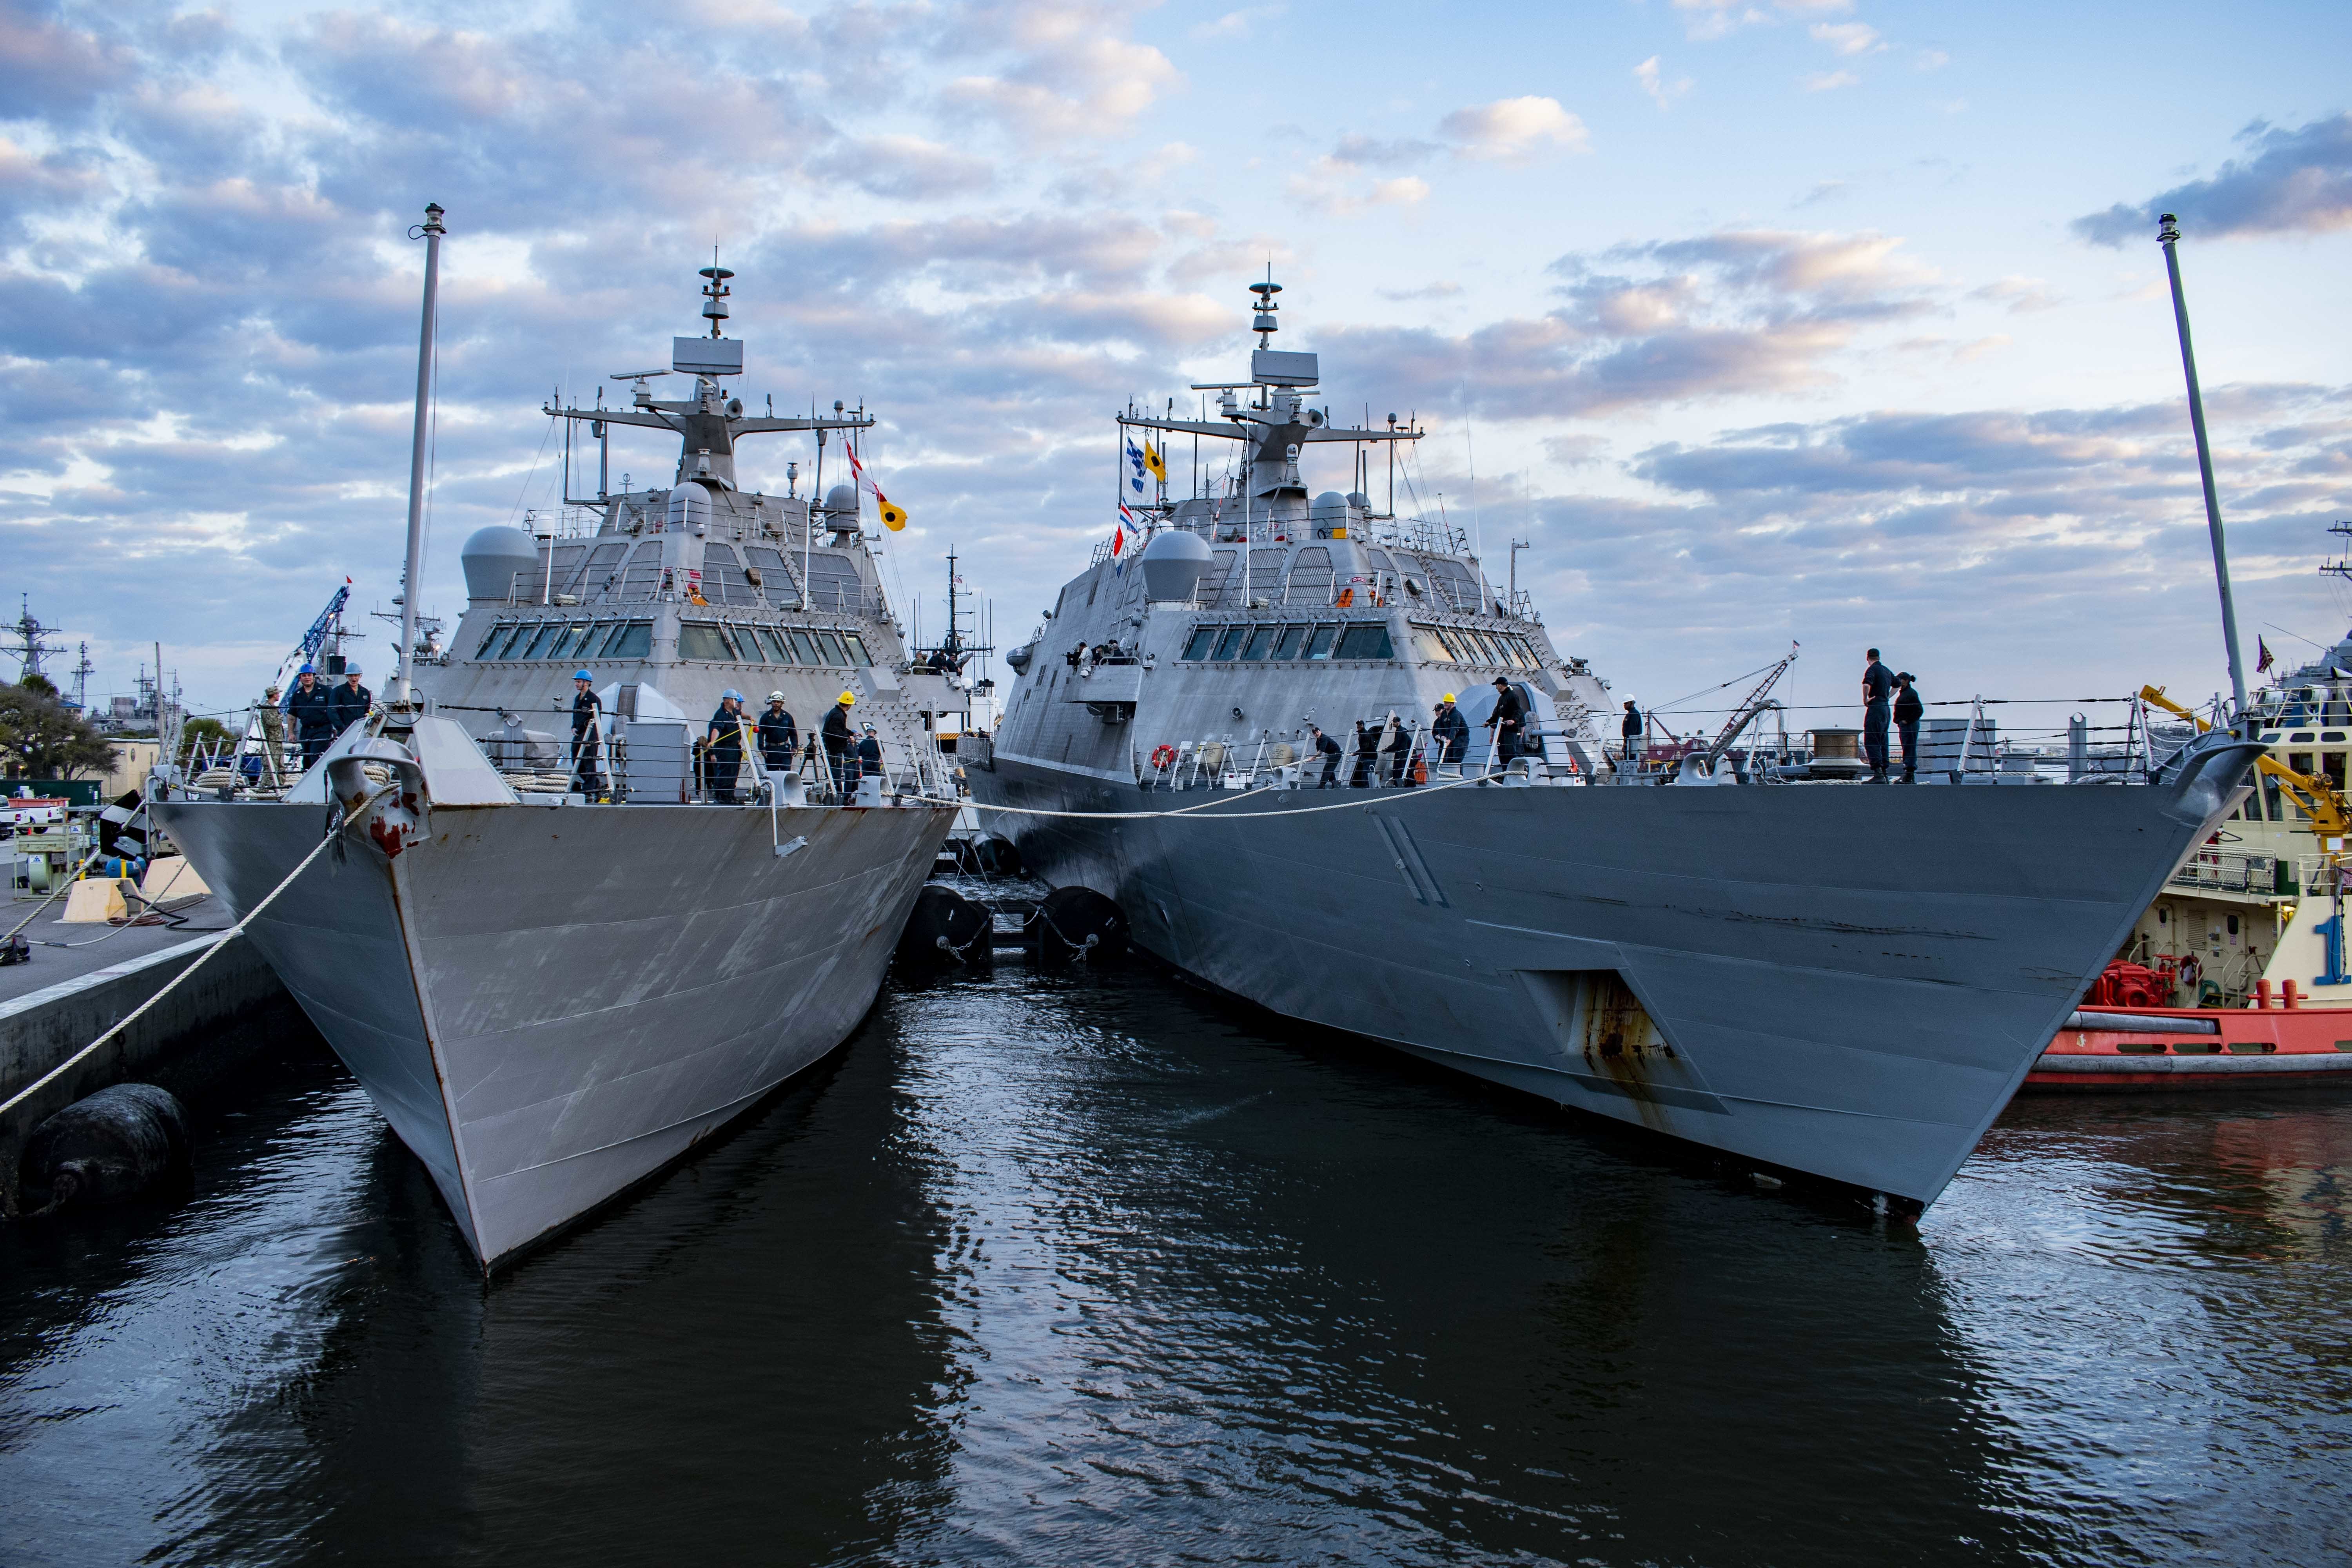 UPDATED: Fleet Growth Stymied by Navy Budget Request - USNI News